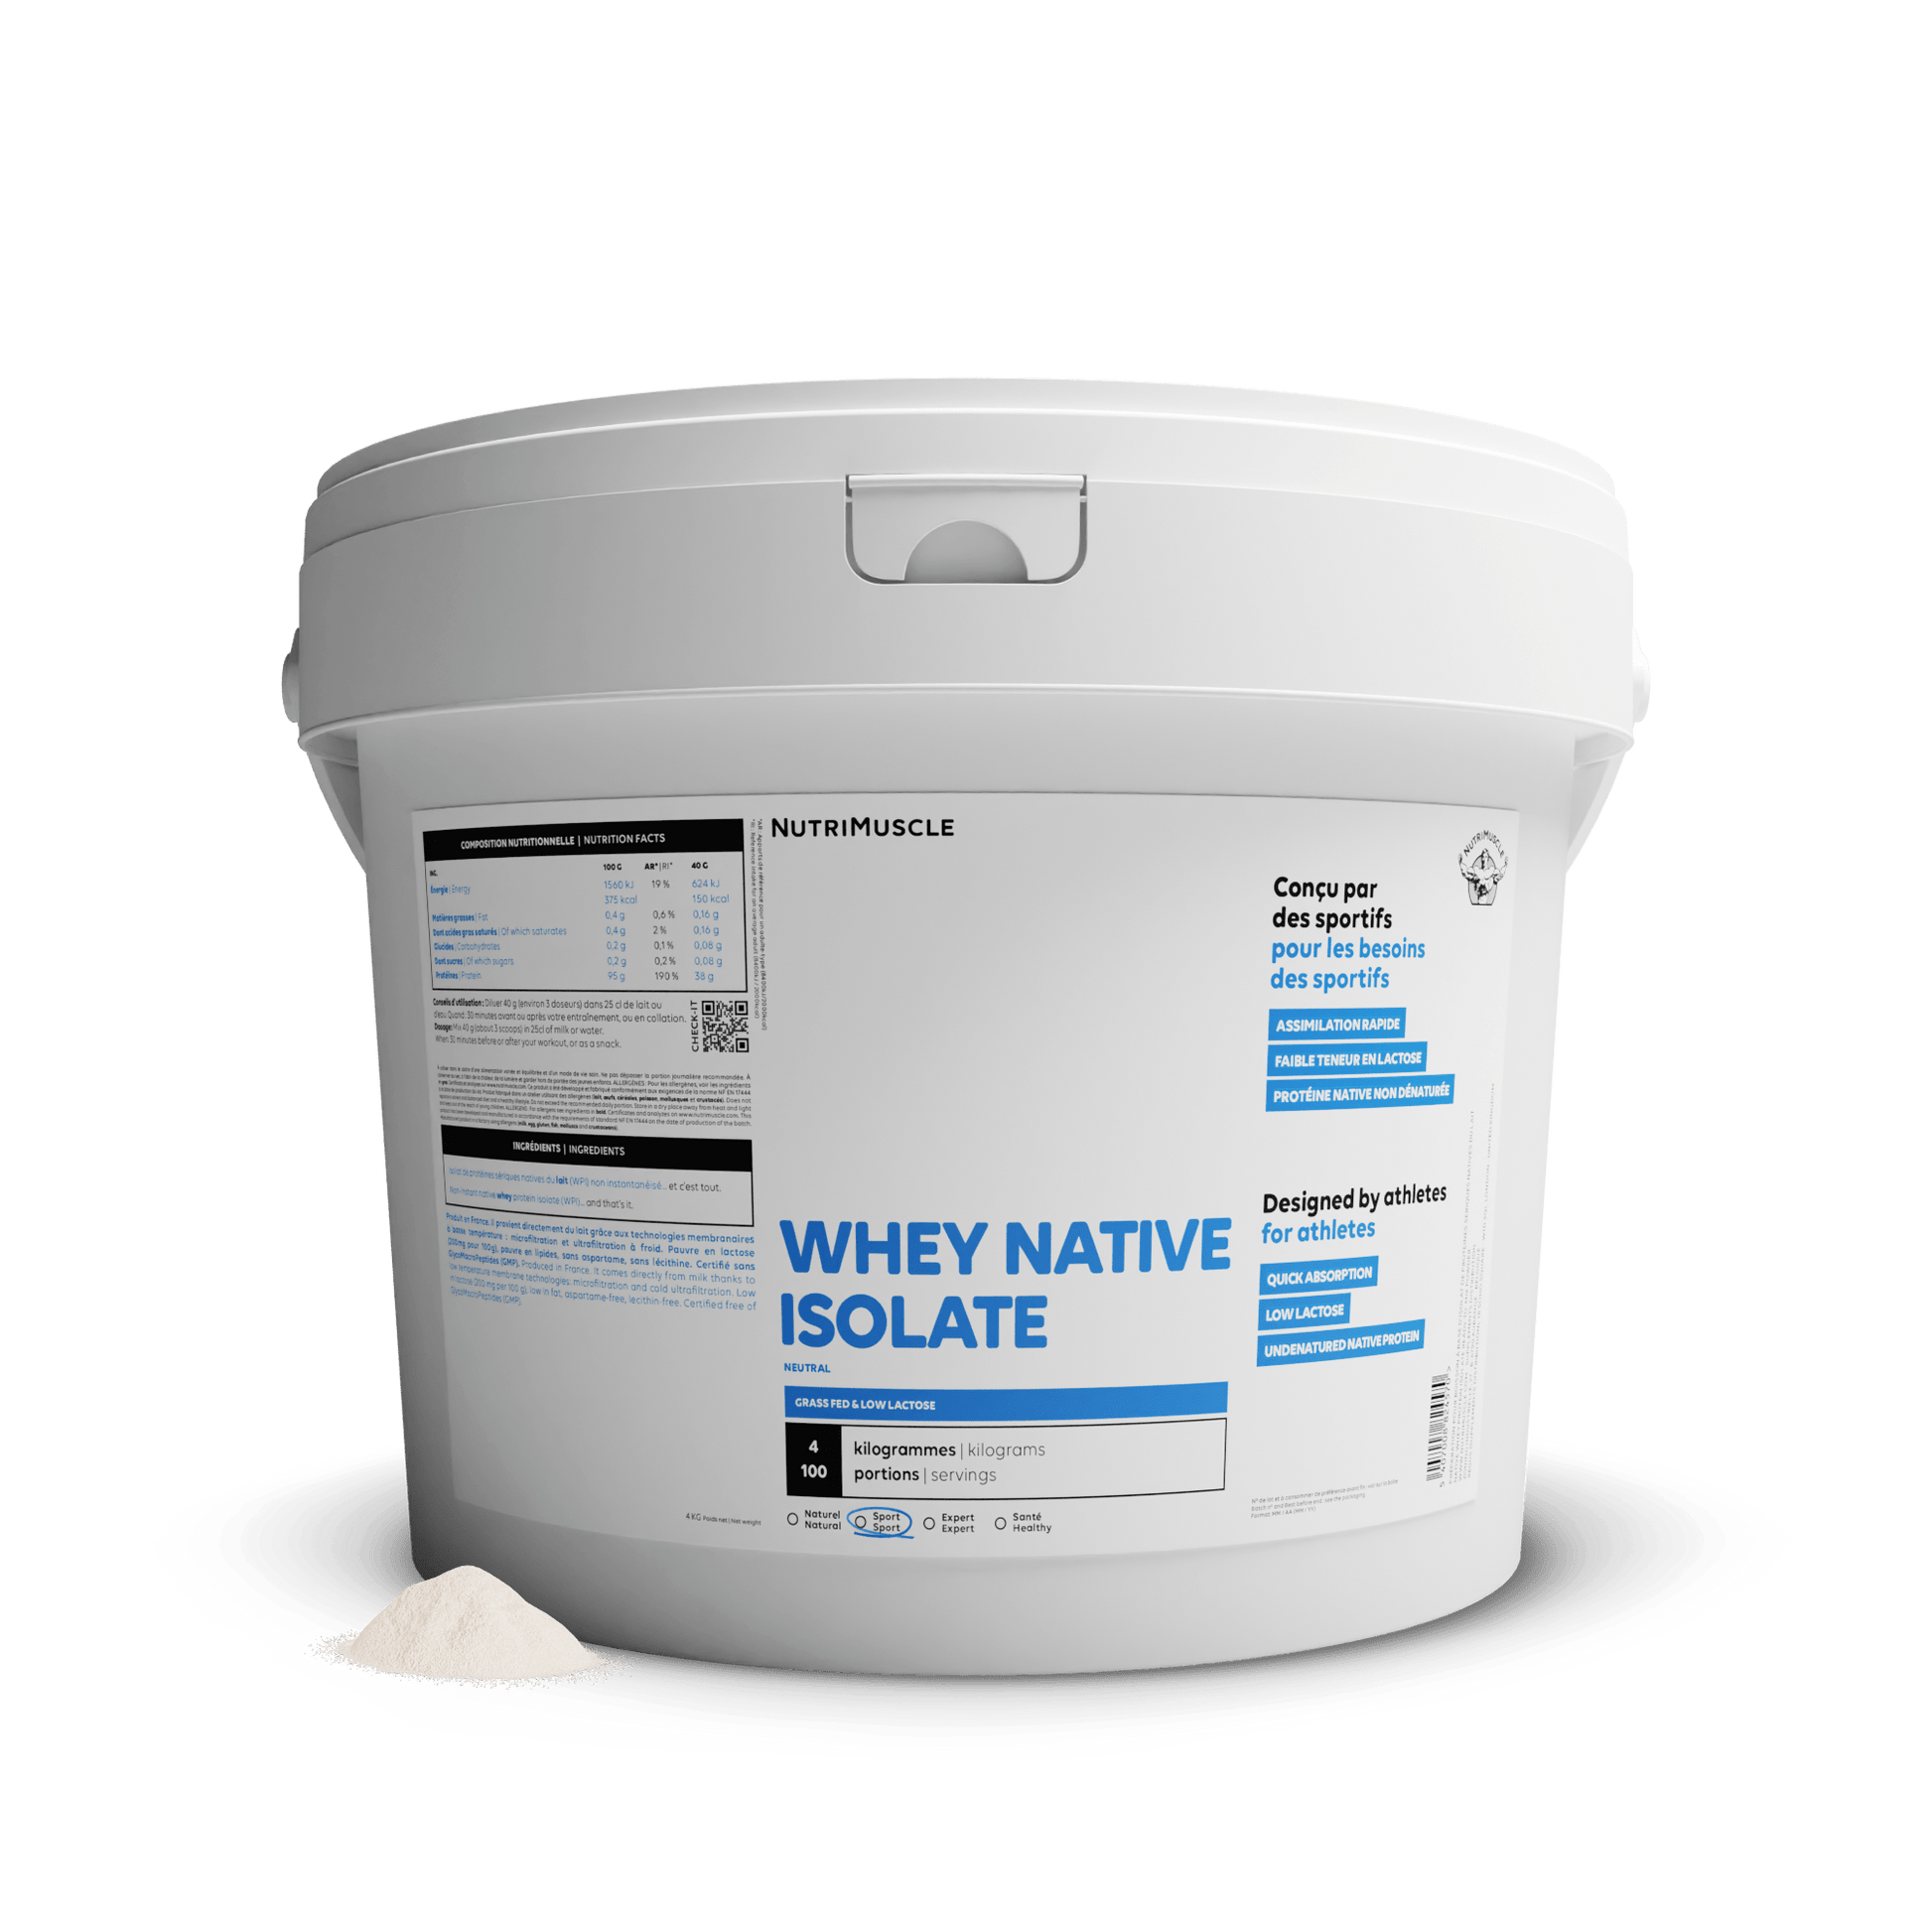 Nutrimuscle Protéines Nature / 4.00 kg Whey Native Isolate (Low lactose)